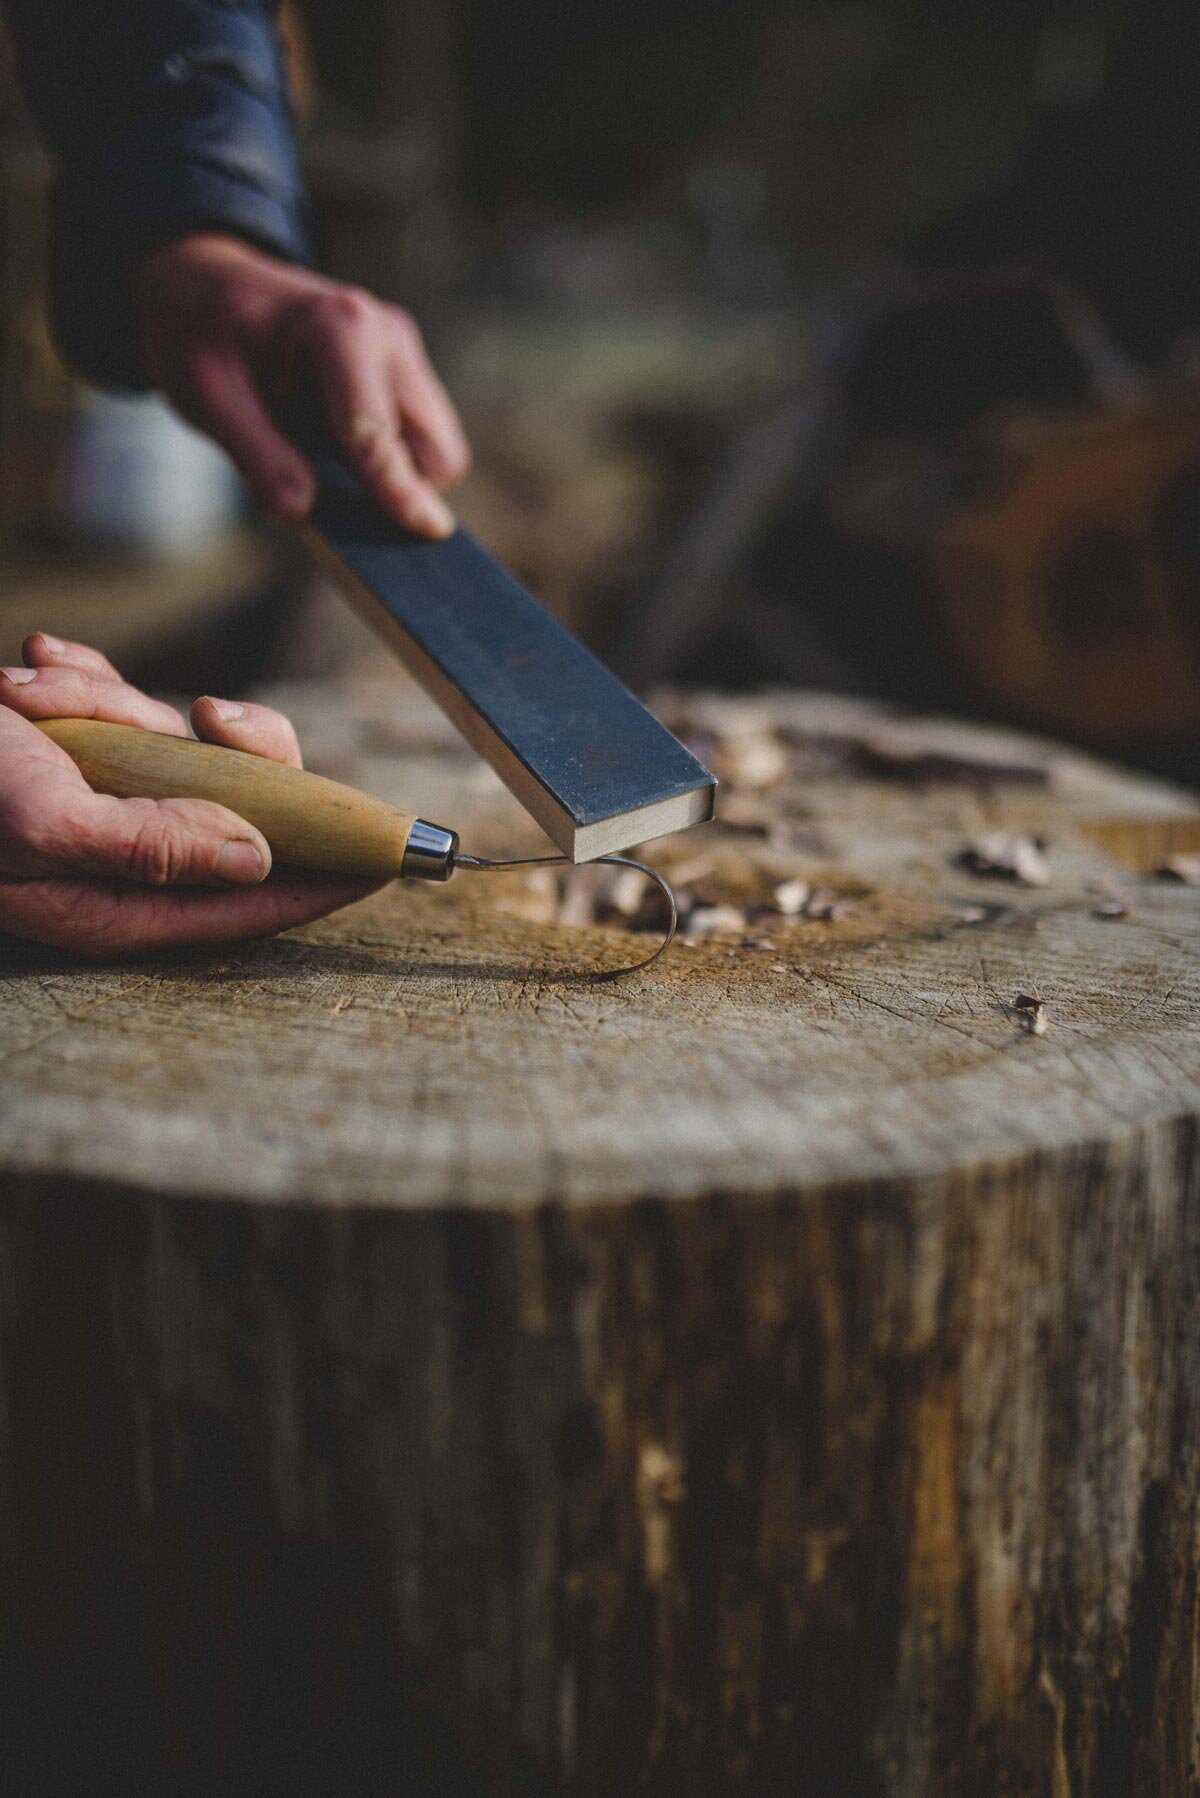 How to Sharpen a Hook Knife — Anne of All Trades